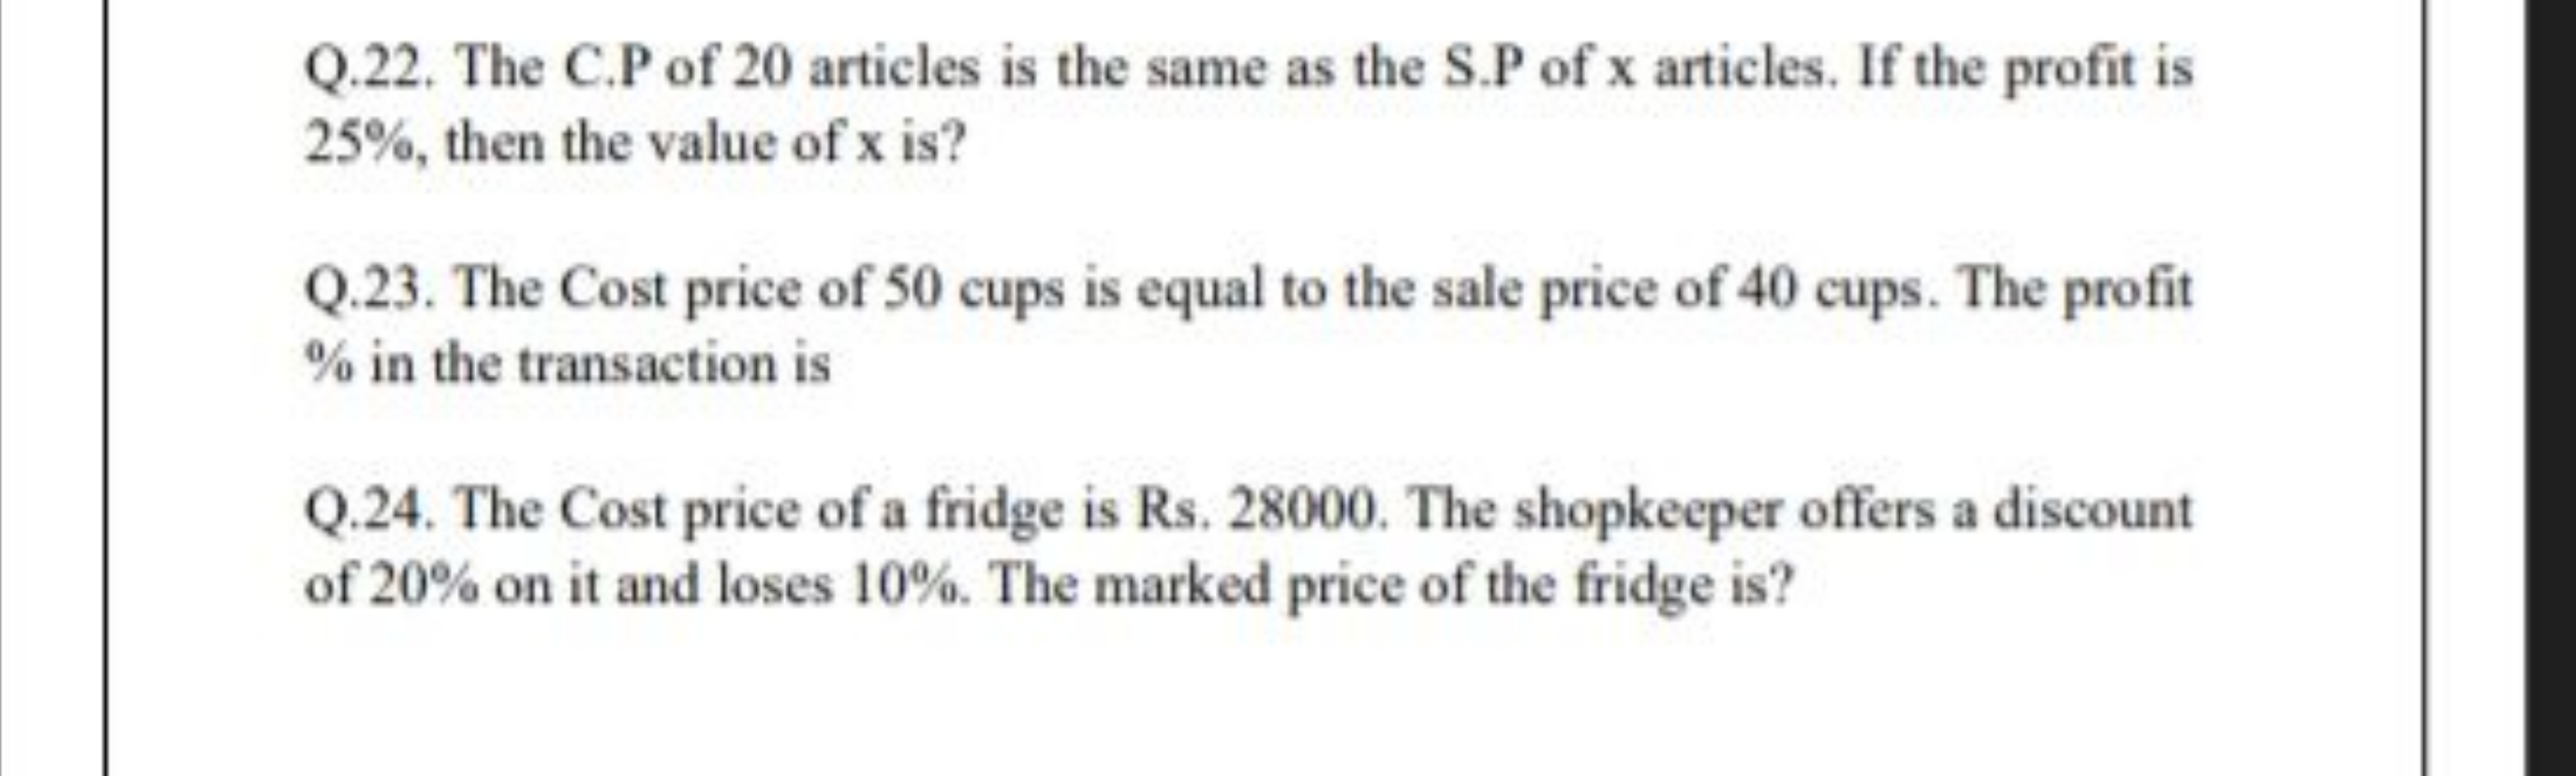 Q.22. The C.P of 20 articles is the same as the S.P of x articles. If 